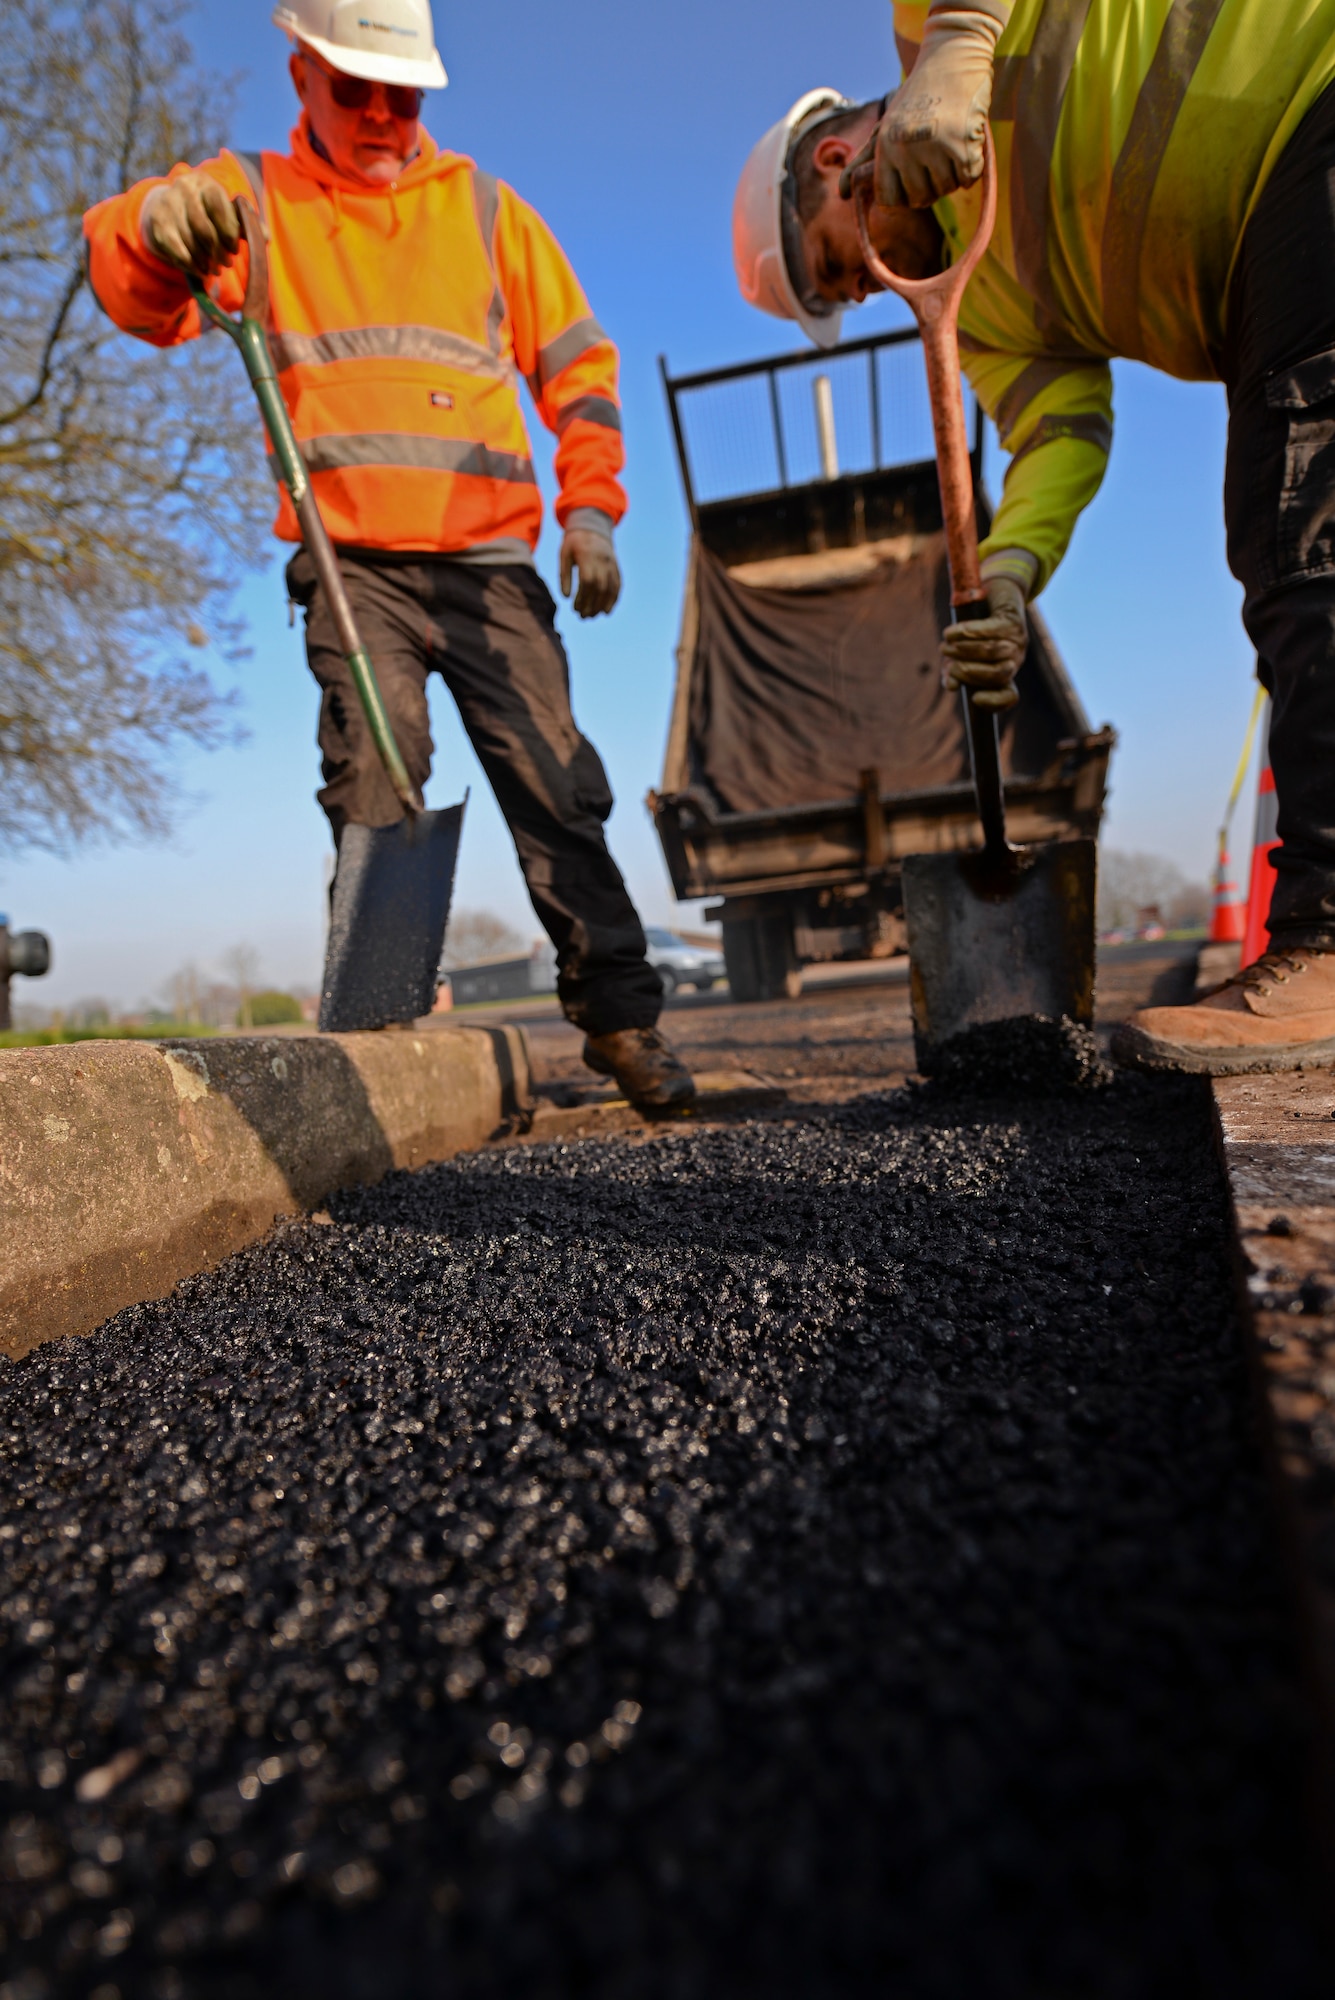 Contracted construction workers fill a hole with asphalt in the 100th Logistics Readiness Squadron Vehicle Operations yard Jan. 20, 2016, on RAF Mildenhall, England. To resurface the yard, construction workers must break up and remove the old tarmac and fill in any uneven surfaces before applying the final layer of asphalt. (U.S. Air Force photo by Staff Sgt. Micaiah Anthony/Released)